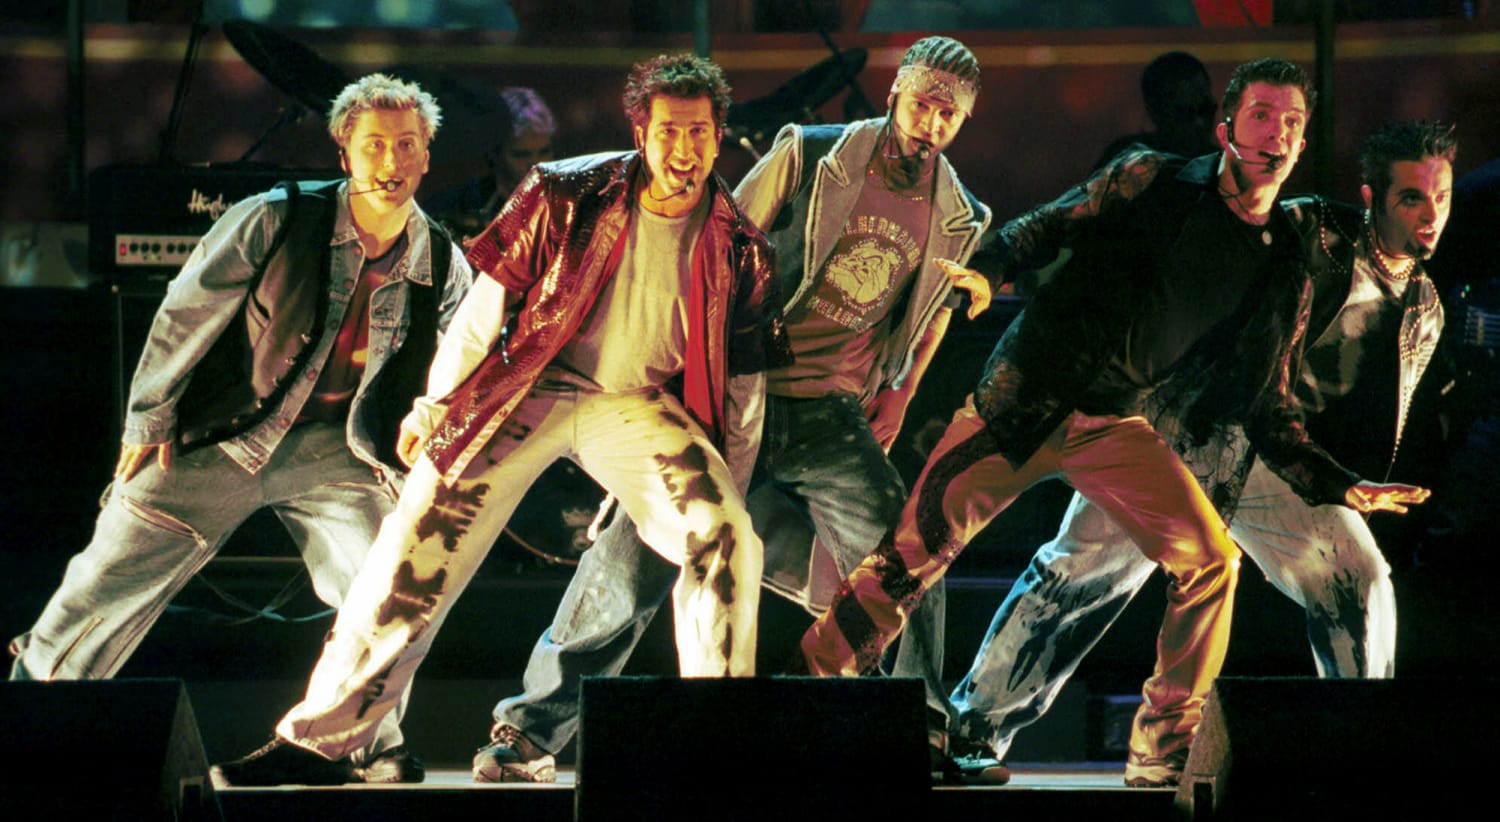 Flashback: See Justin Timberlake and the rest of 'NSYNC on TODAY in 2000